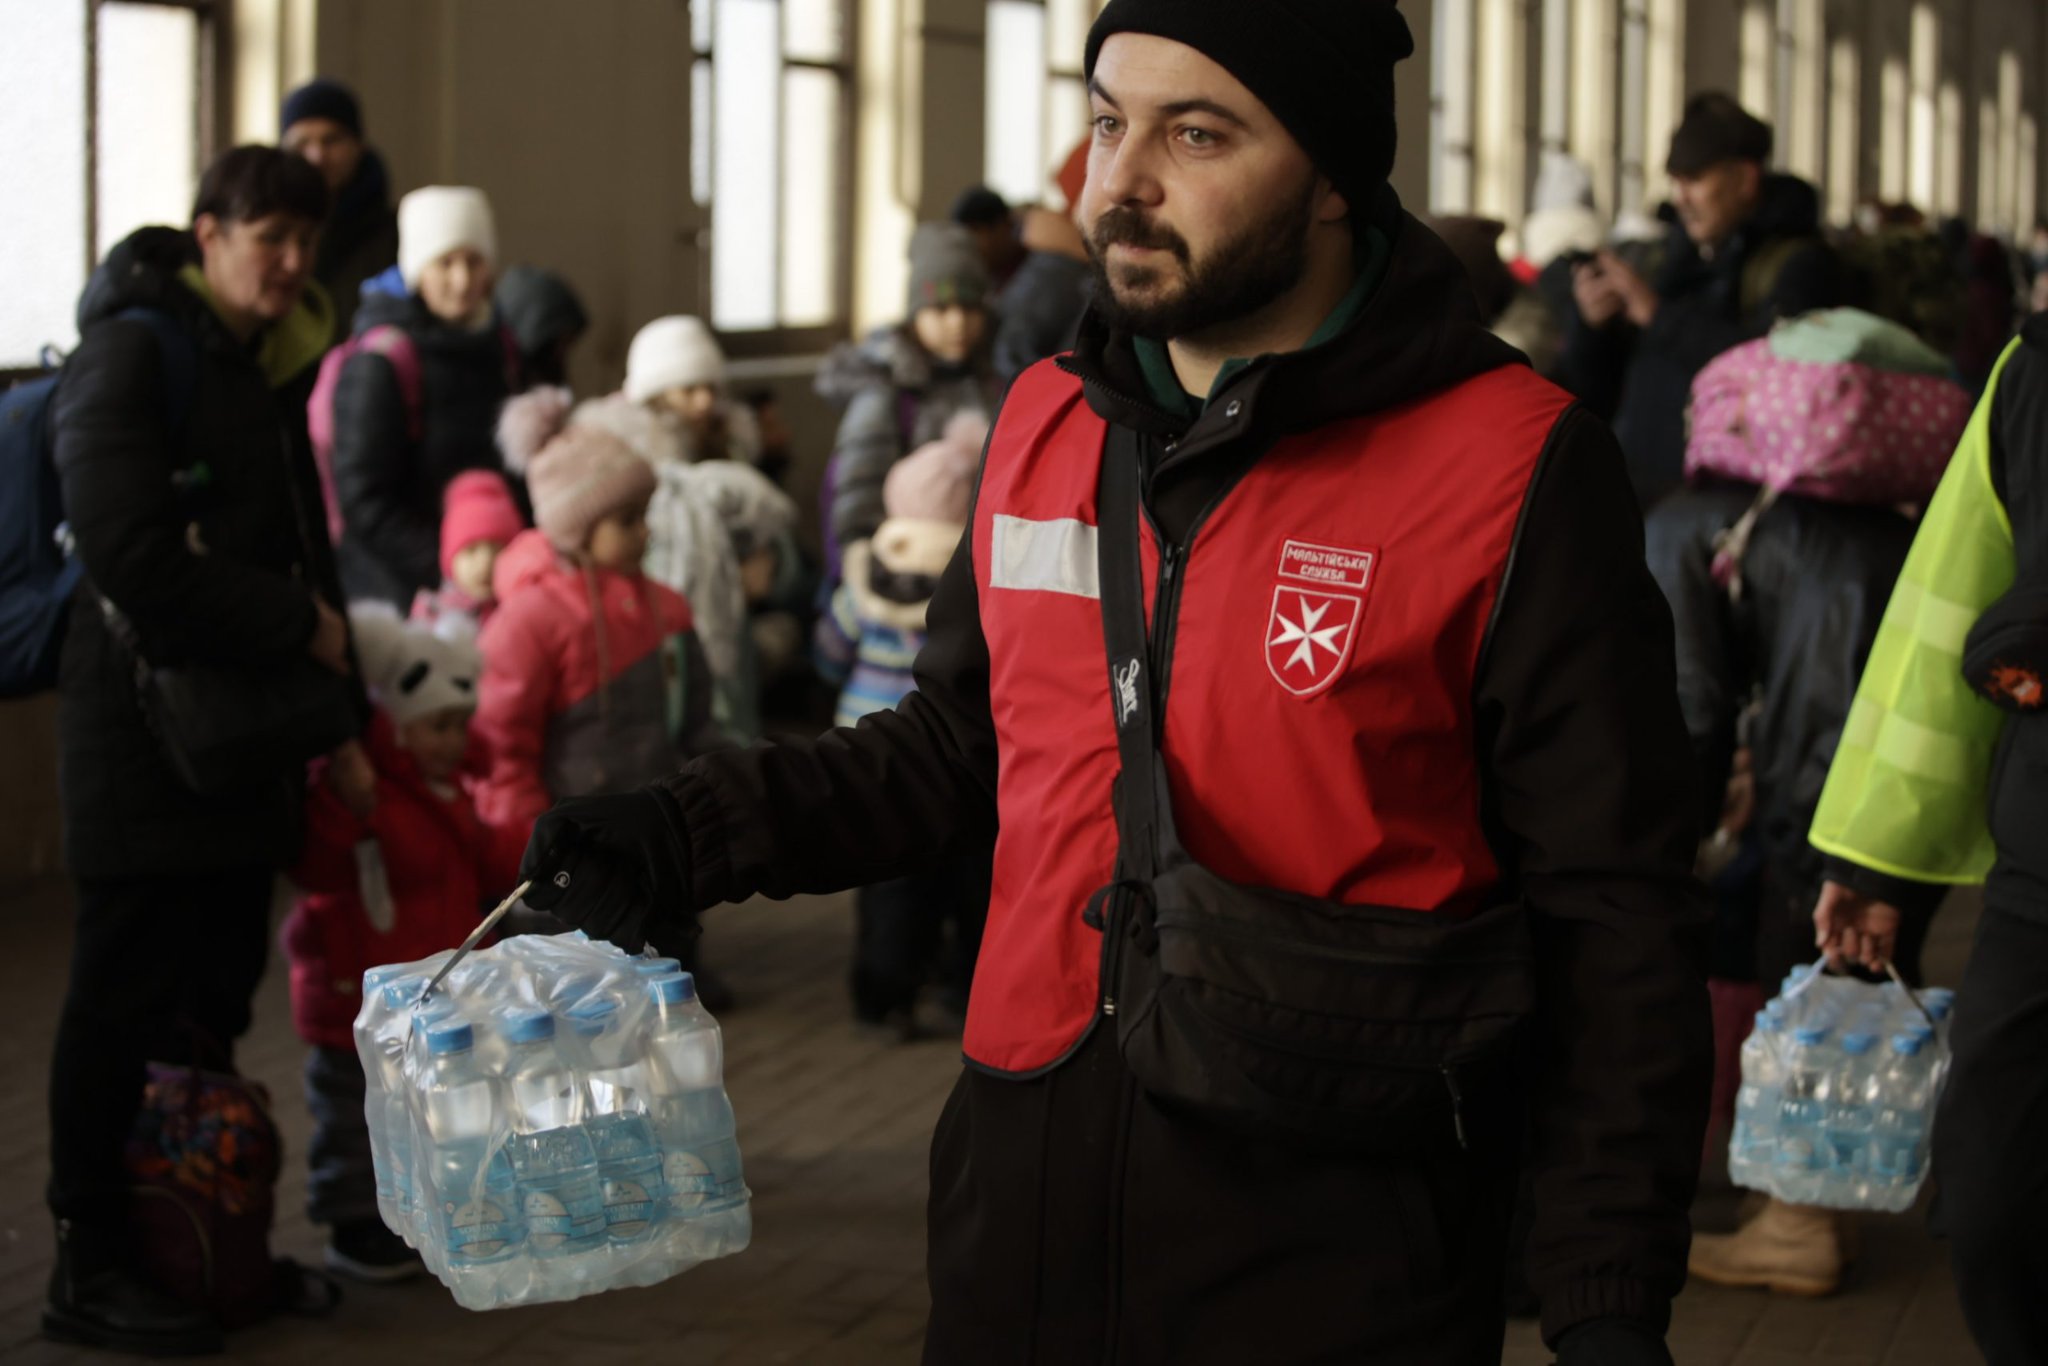 Six months war in Ukraine: Humanitarian aid from the Order of Malta reaches 65 locations throughout the country